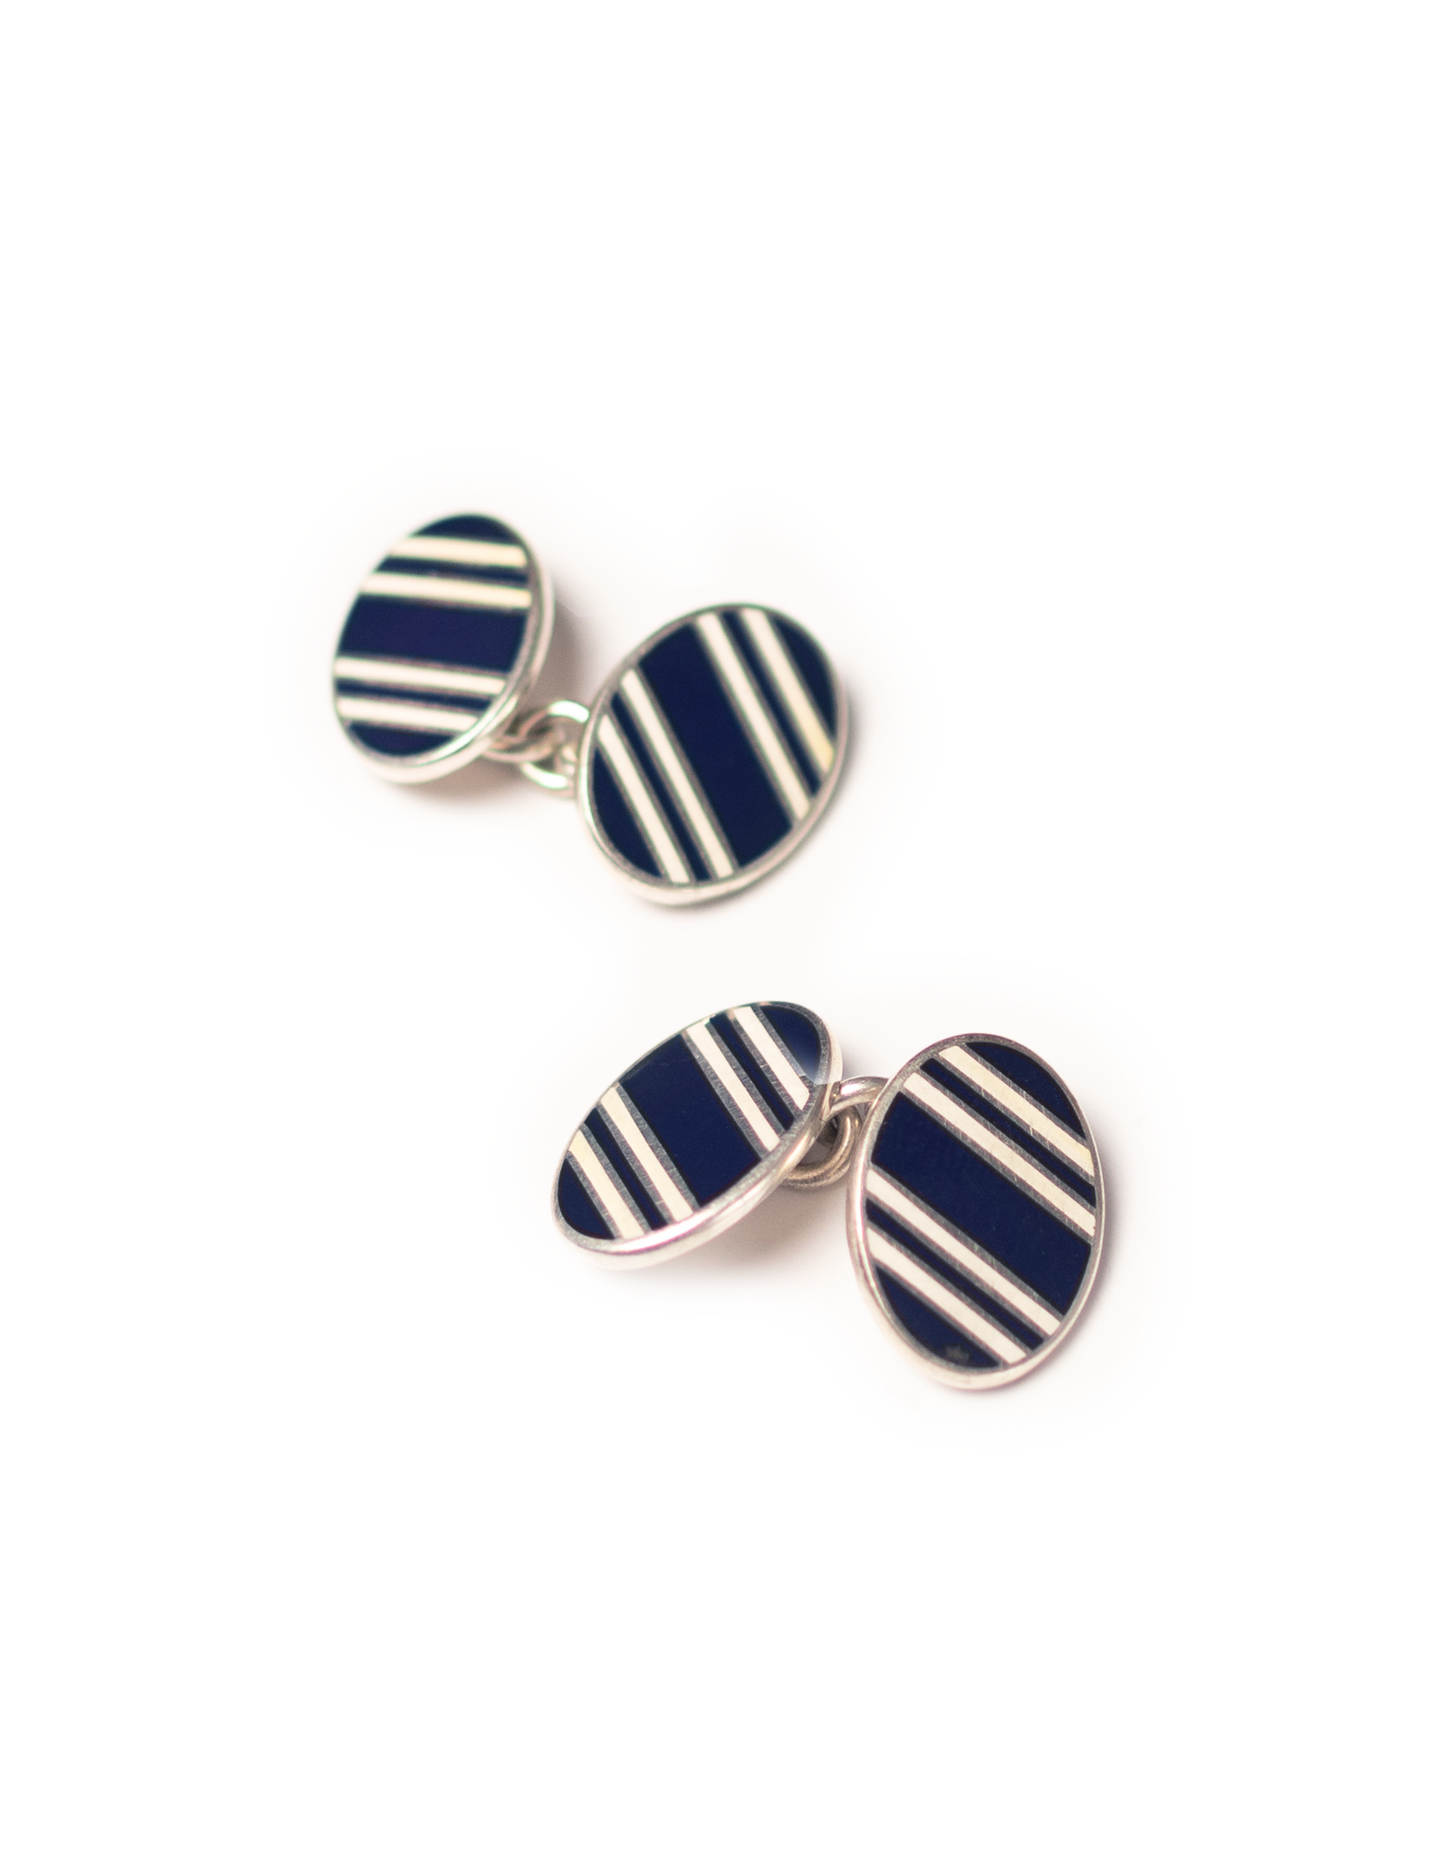 NAVY WHITE DOUBLE OVAL CUFFLINKS - SILVER